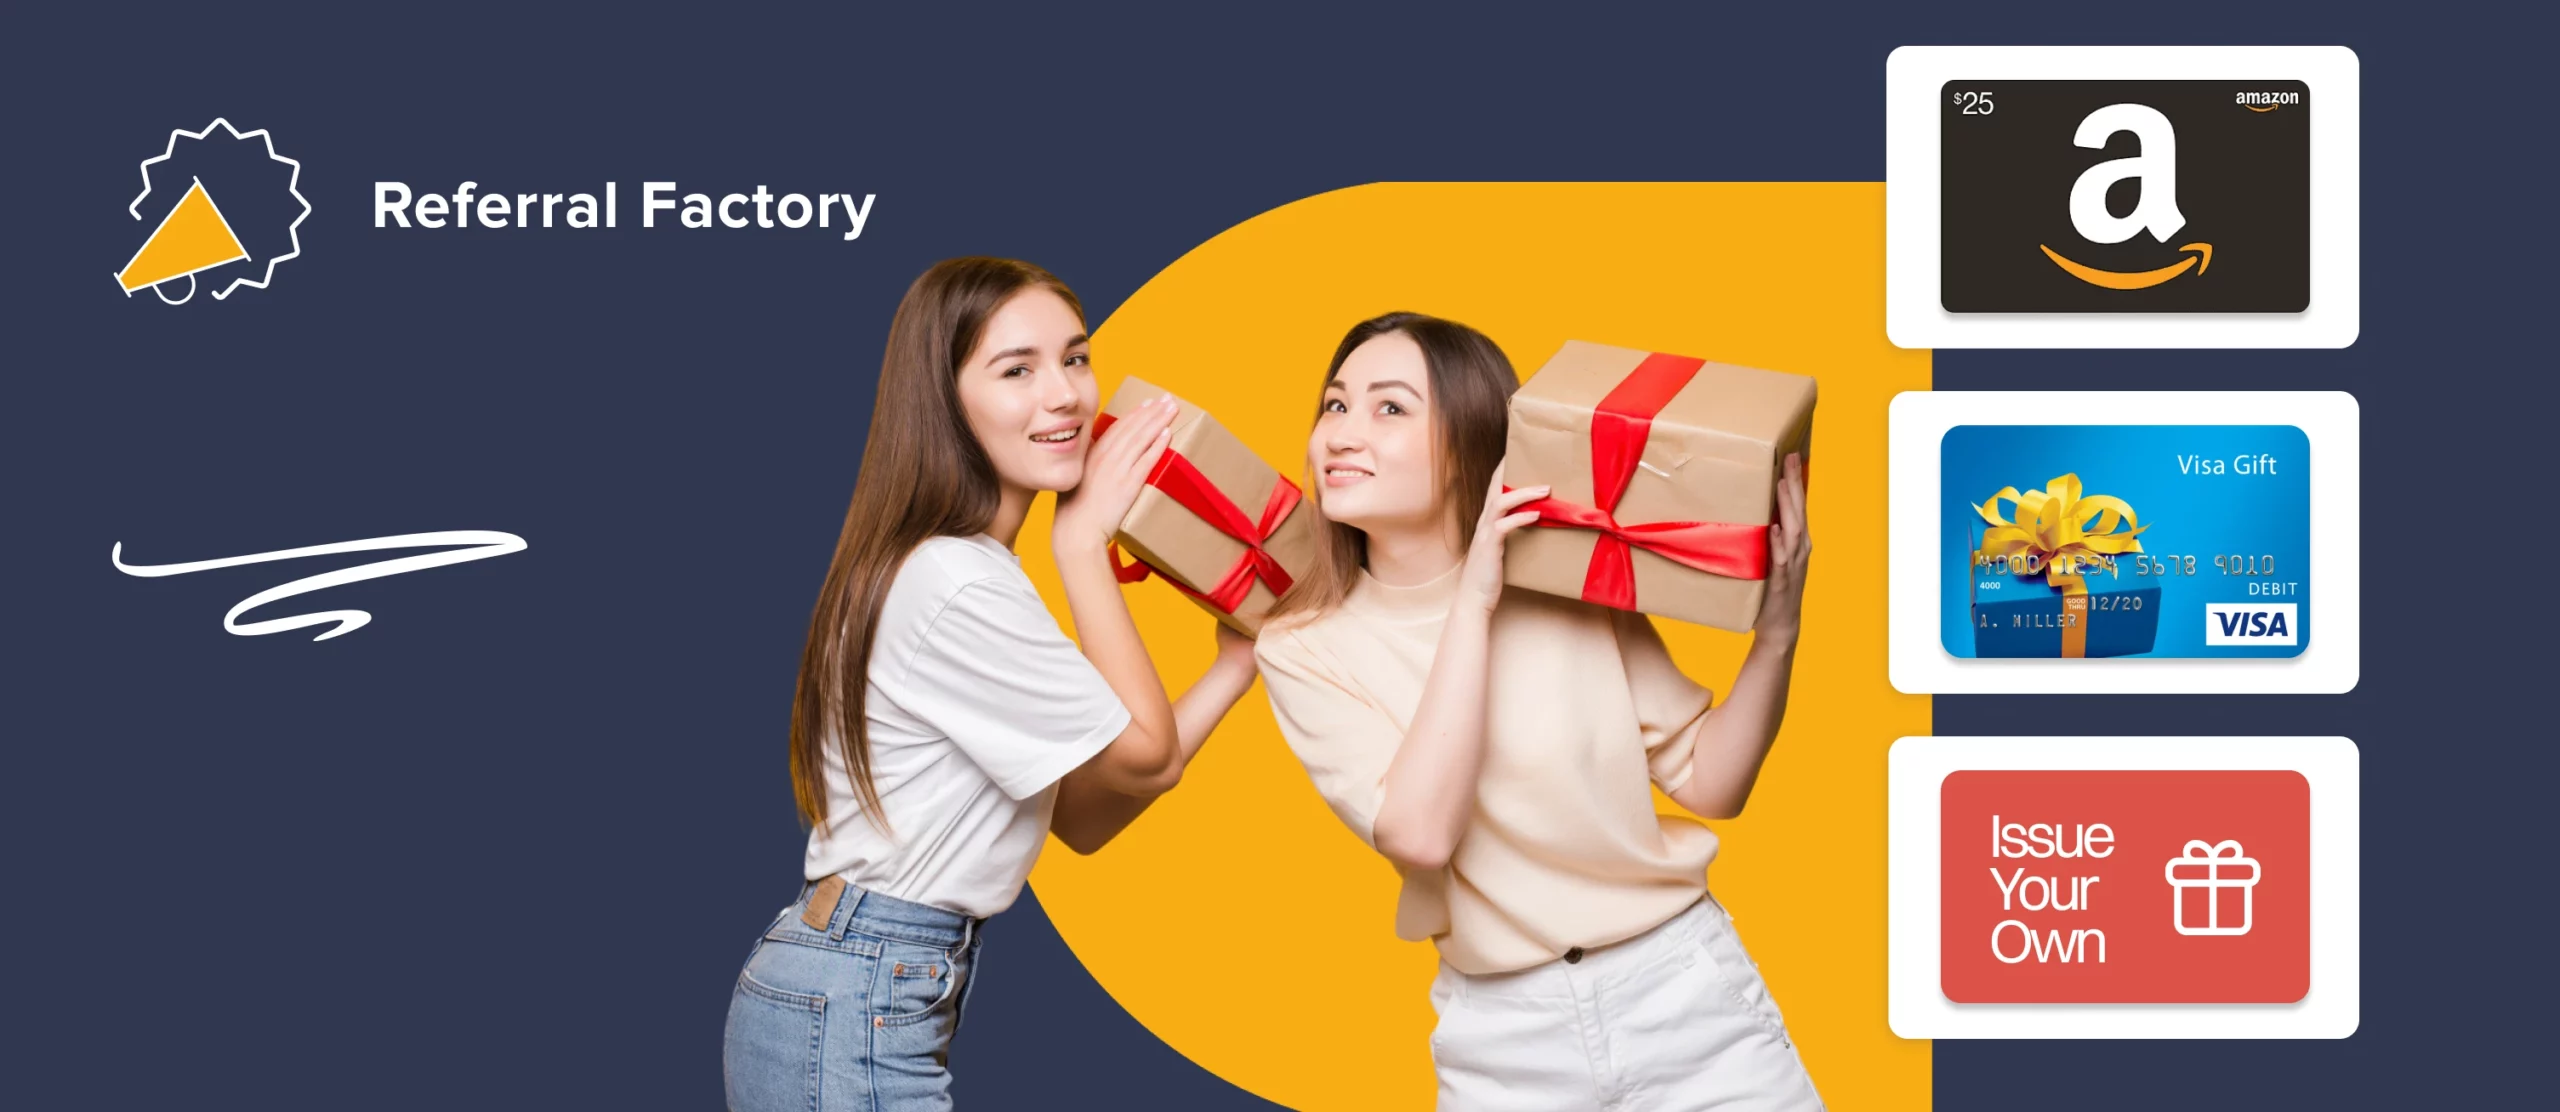 word of mouth marketing rewards and incentives referral program referral factory